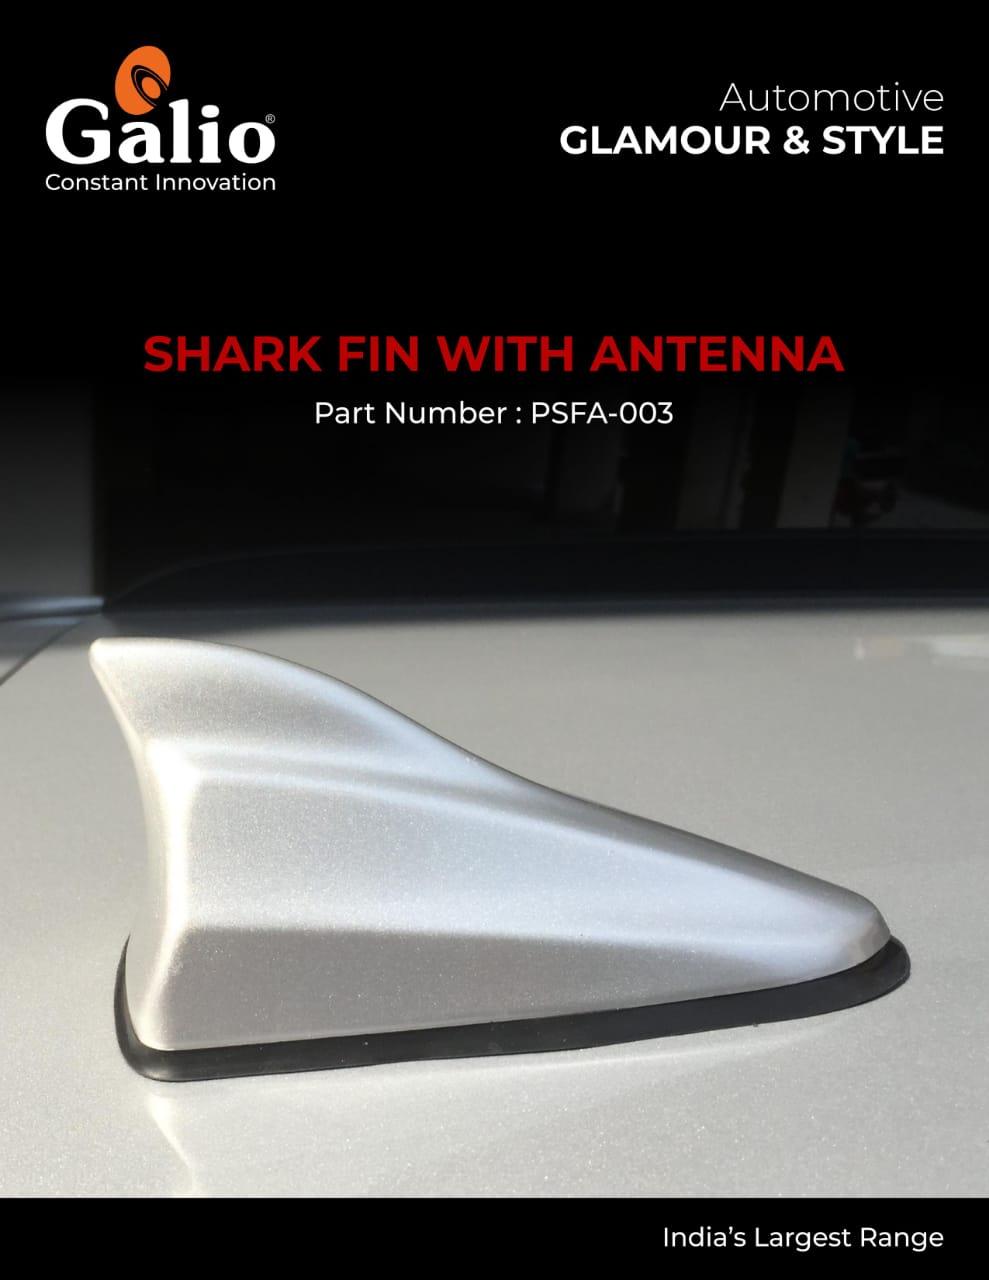 Buy Car Shark Fin With Antenna Online at Best Price in India